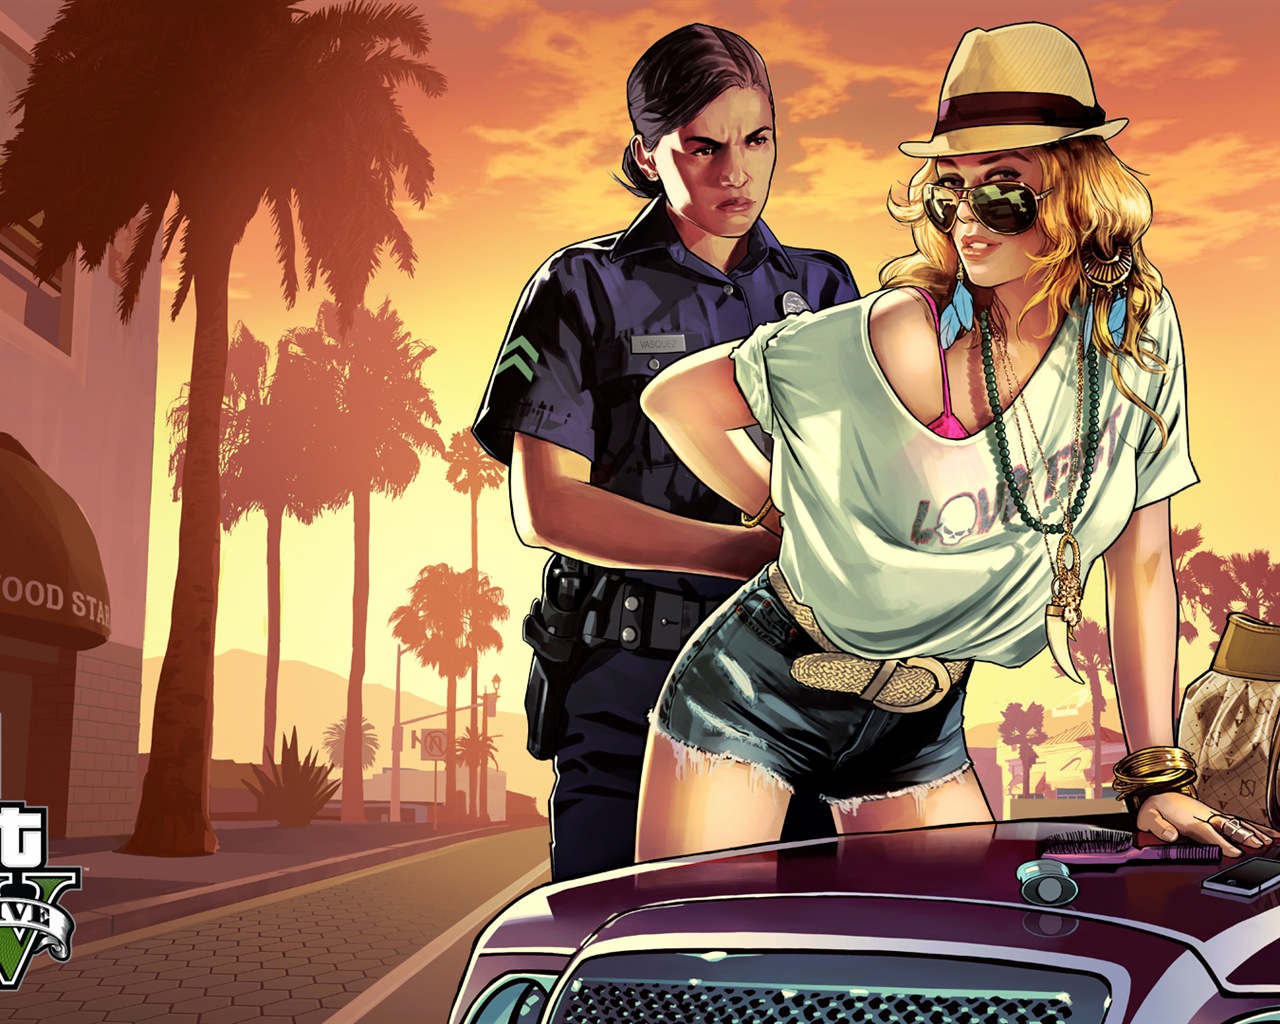 Grand Theft Auto V GTA 5 HD game wallpapers #18 - 1280x1024